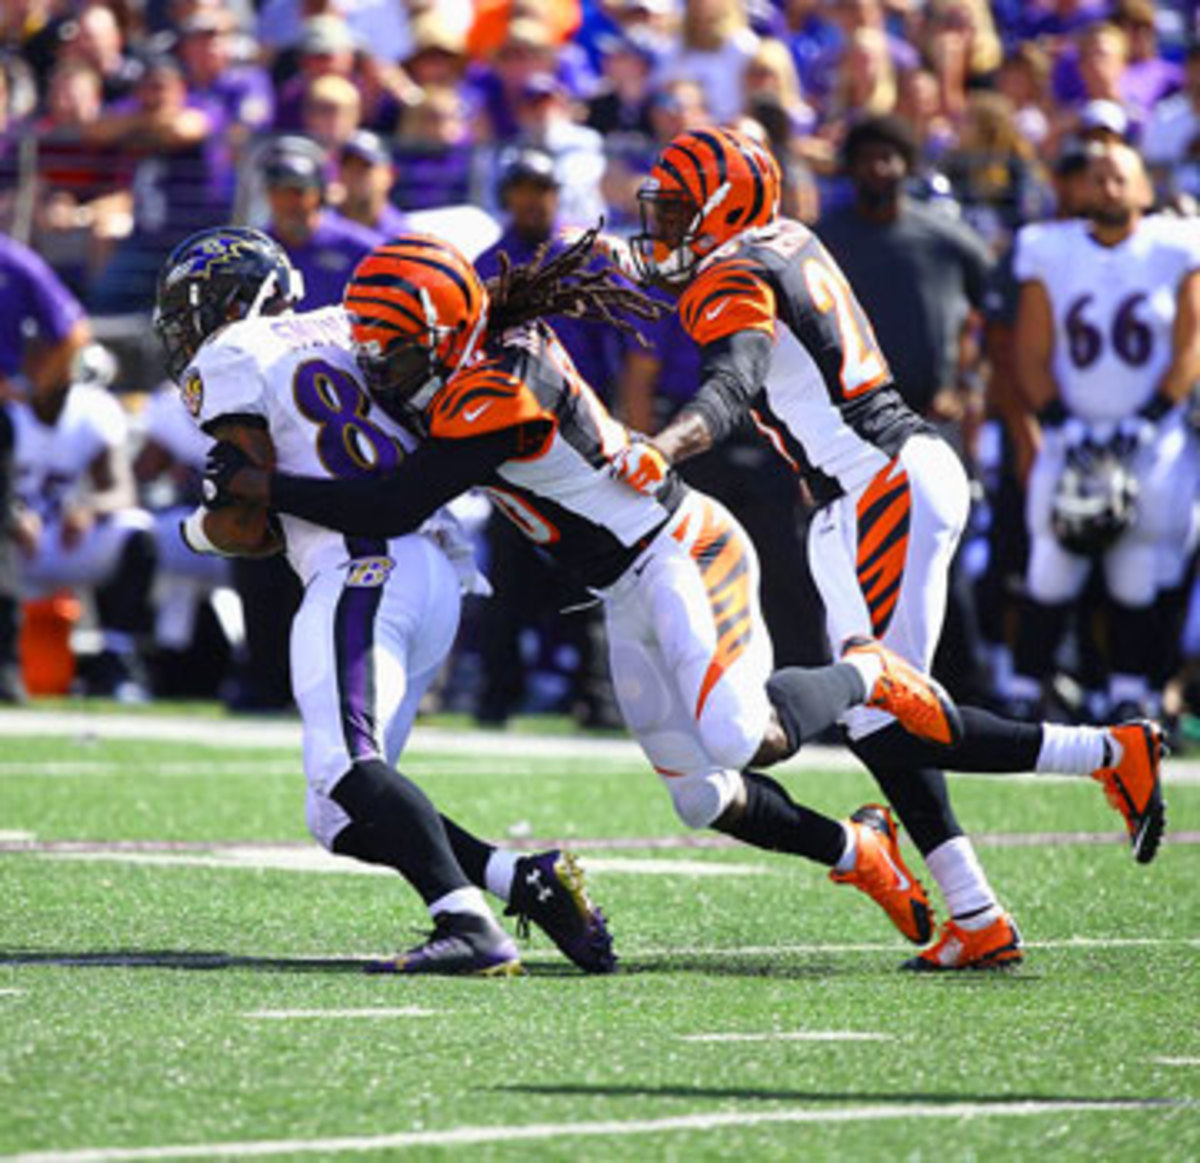 The Bengals’ Reggie Nelson brings down Ravens wideout Steve Smith. (Simon Bruty/SI/The MMQB)